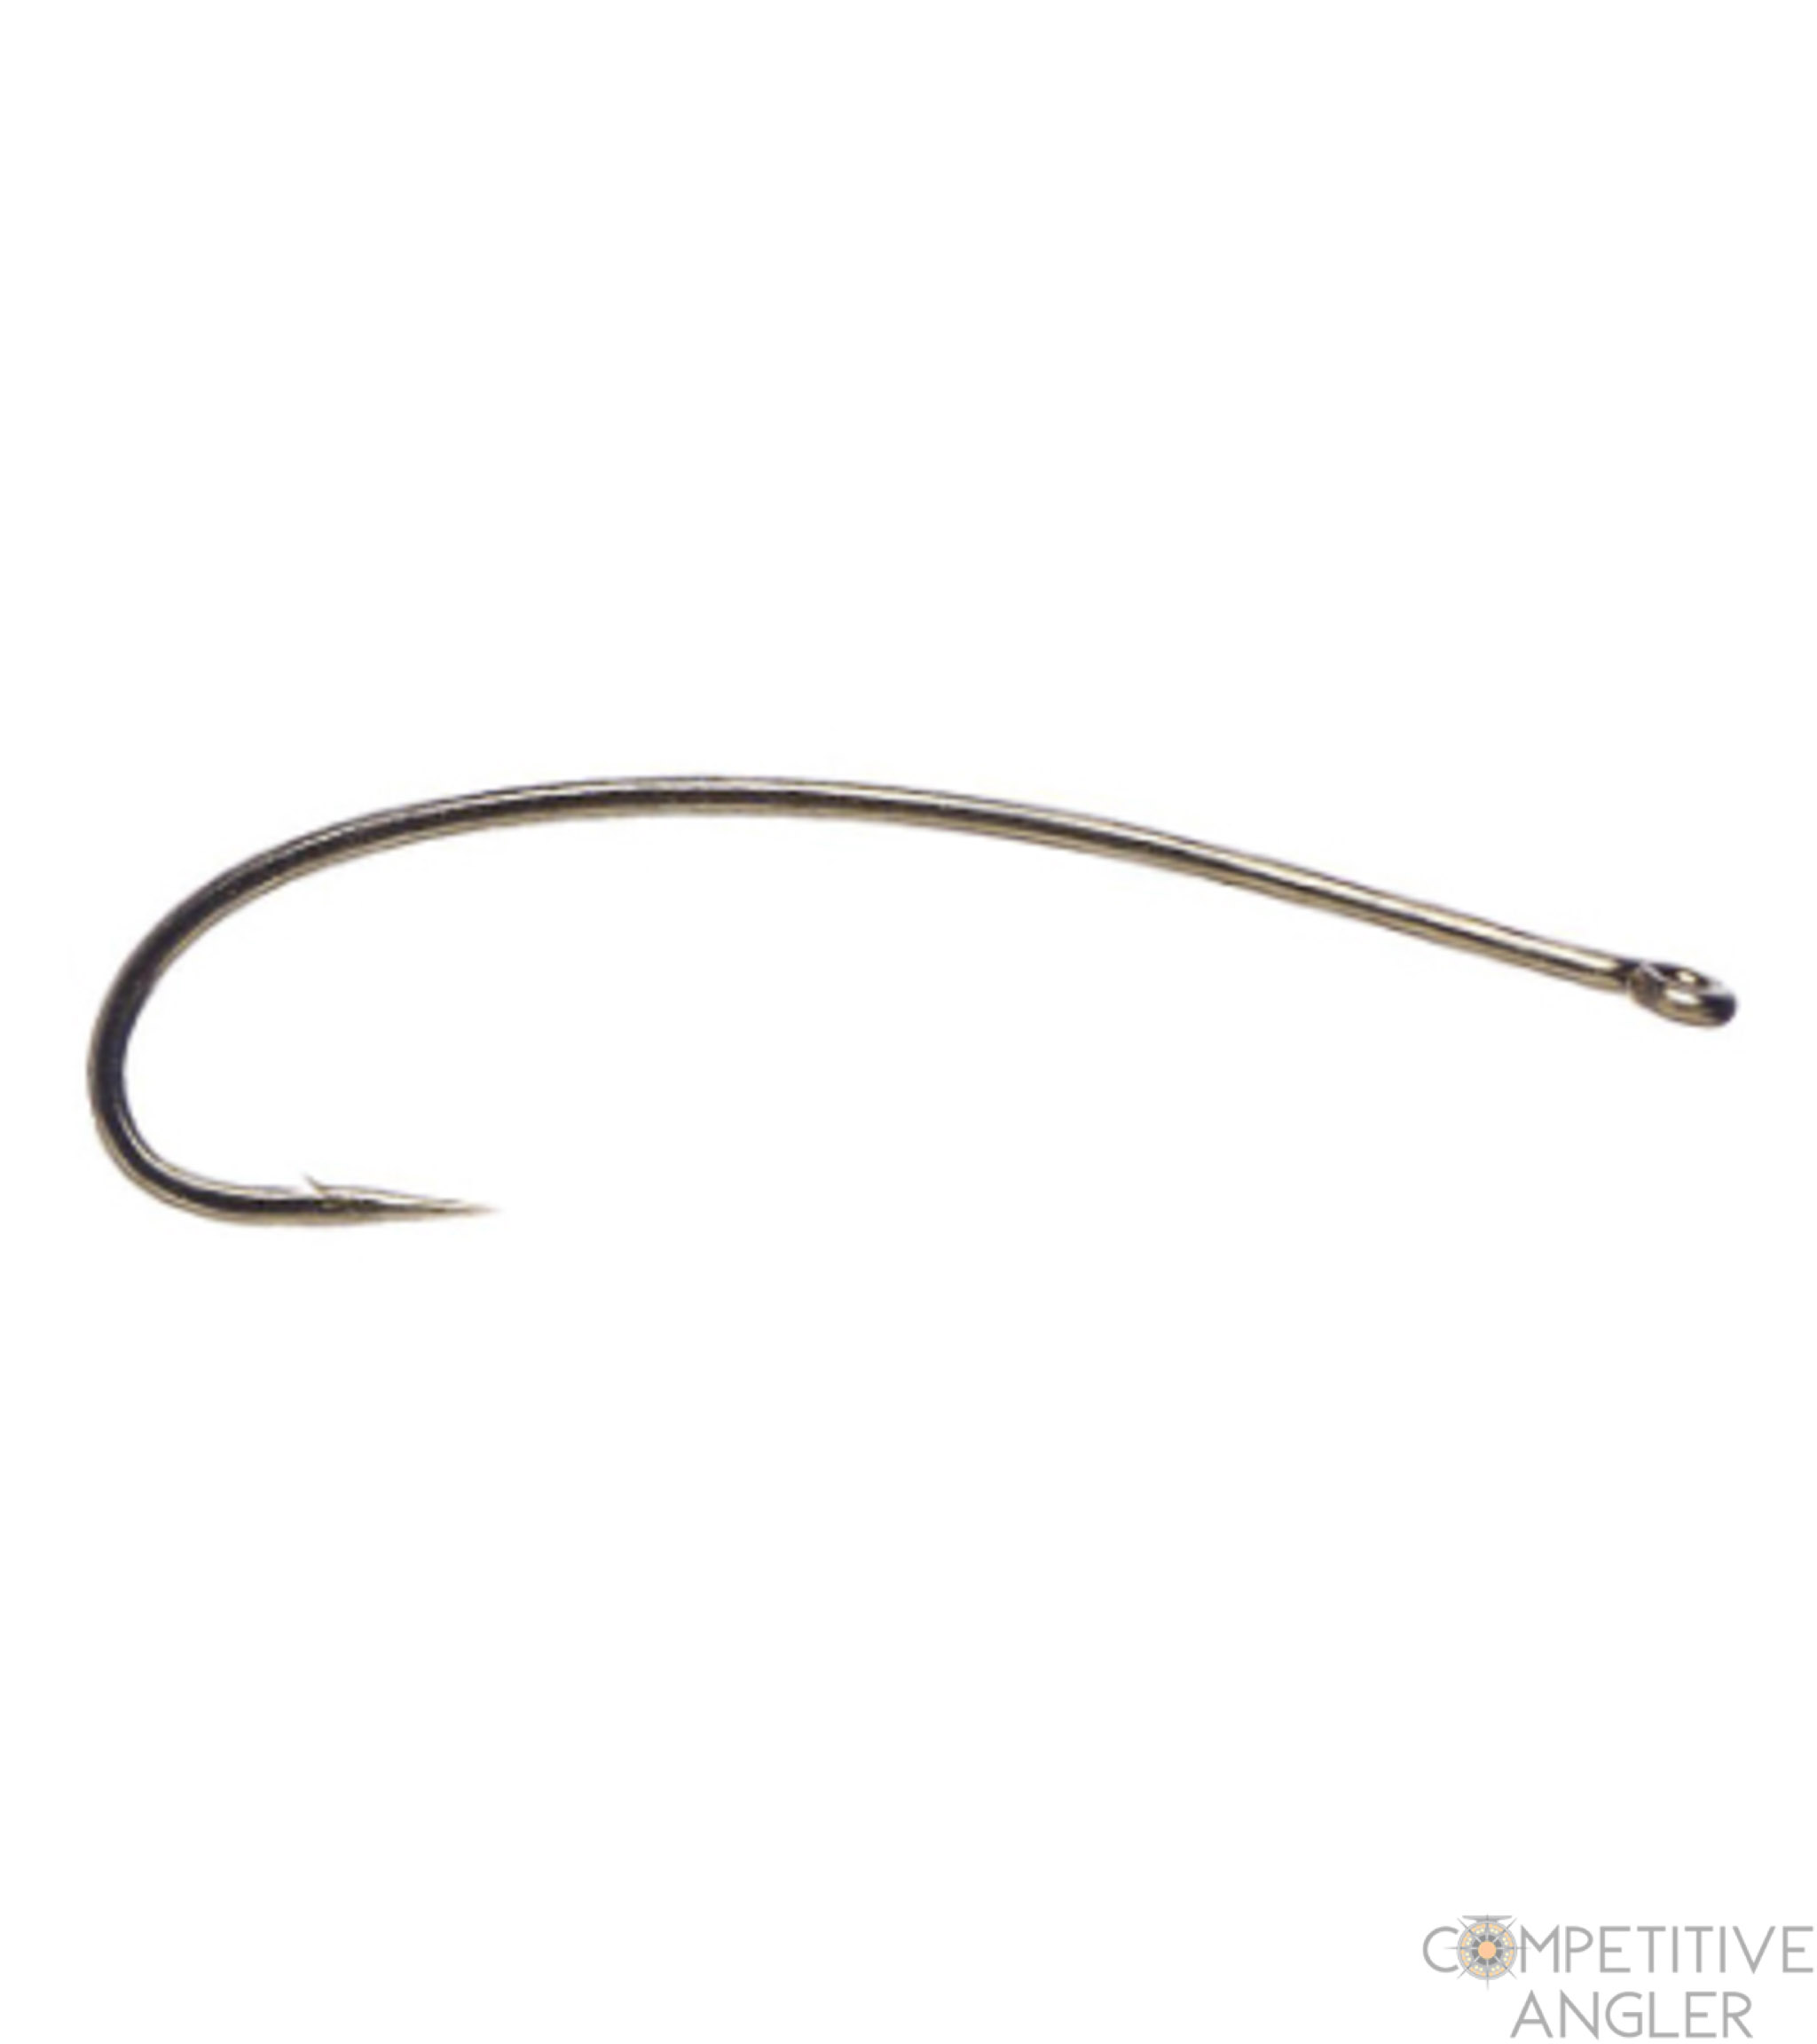 Daiichi 1270 Multi-Use Curved Hook - Competitive Angler